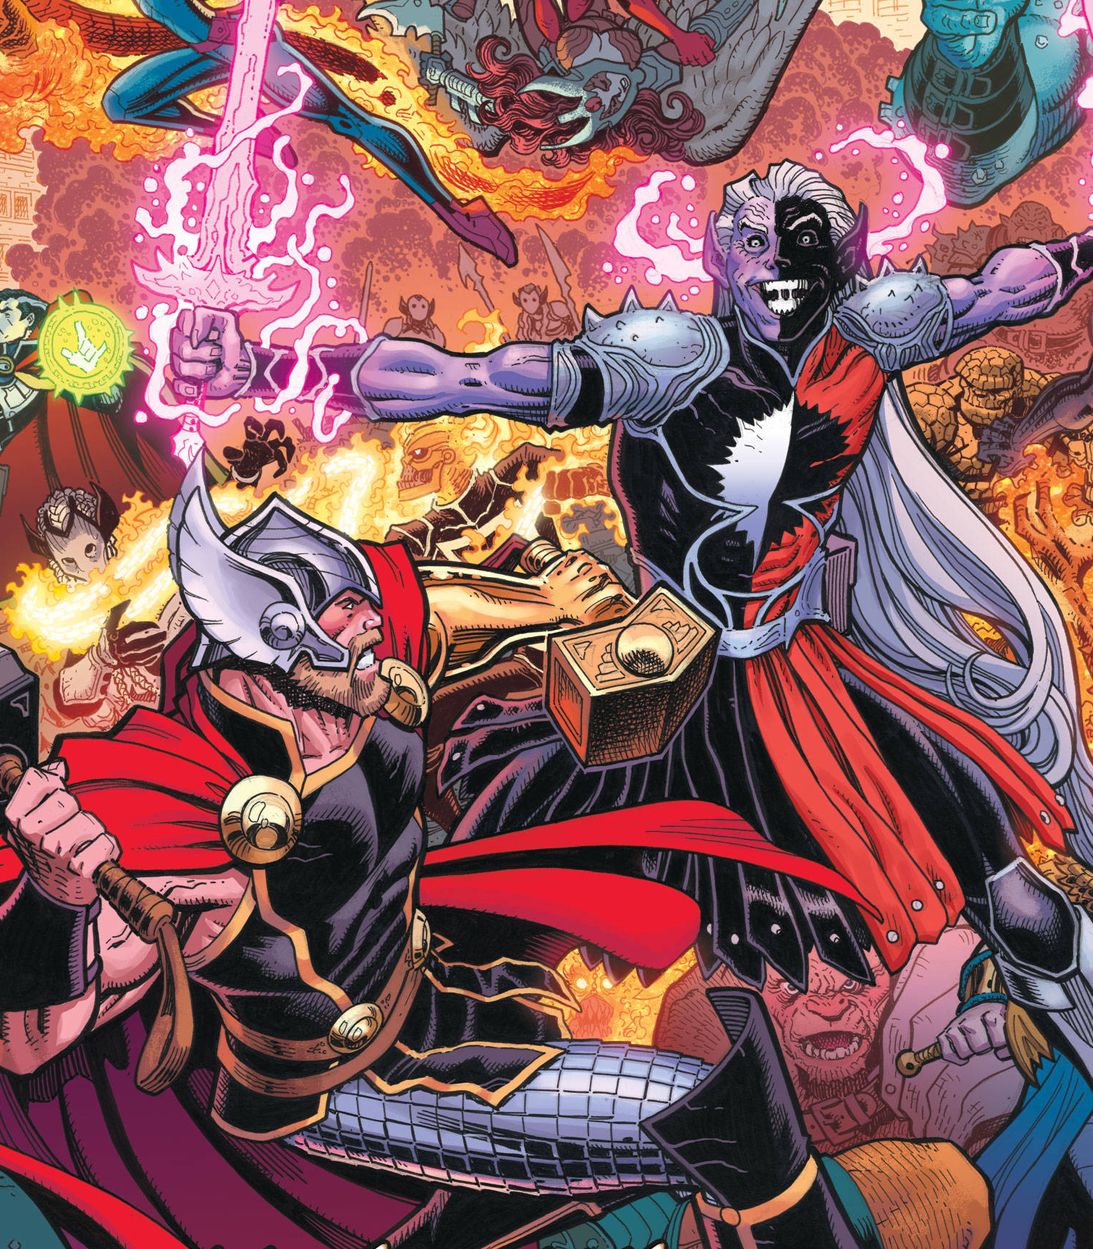 War of the Realms #1 by Art Adams